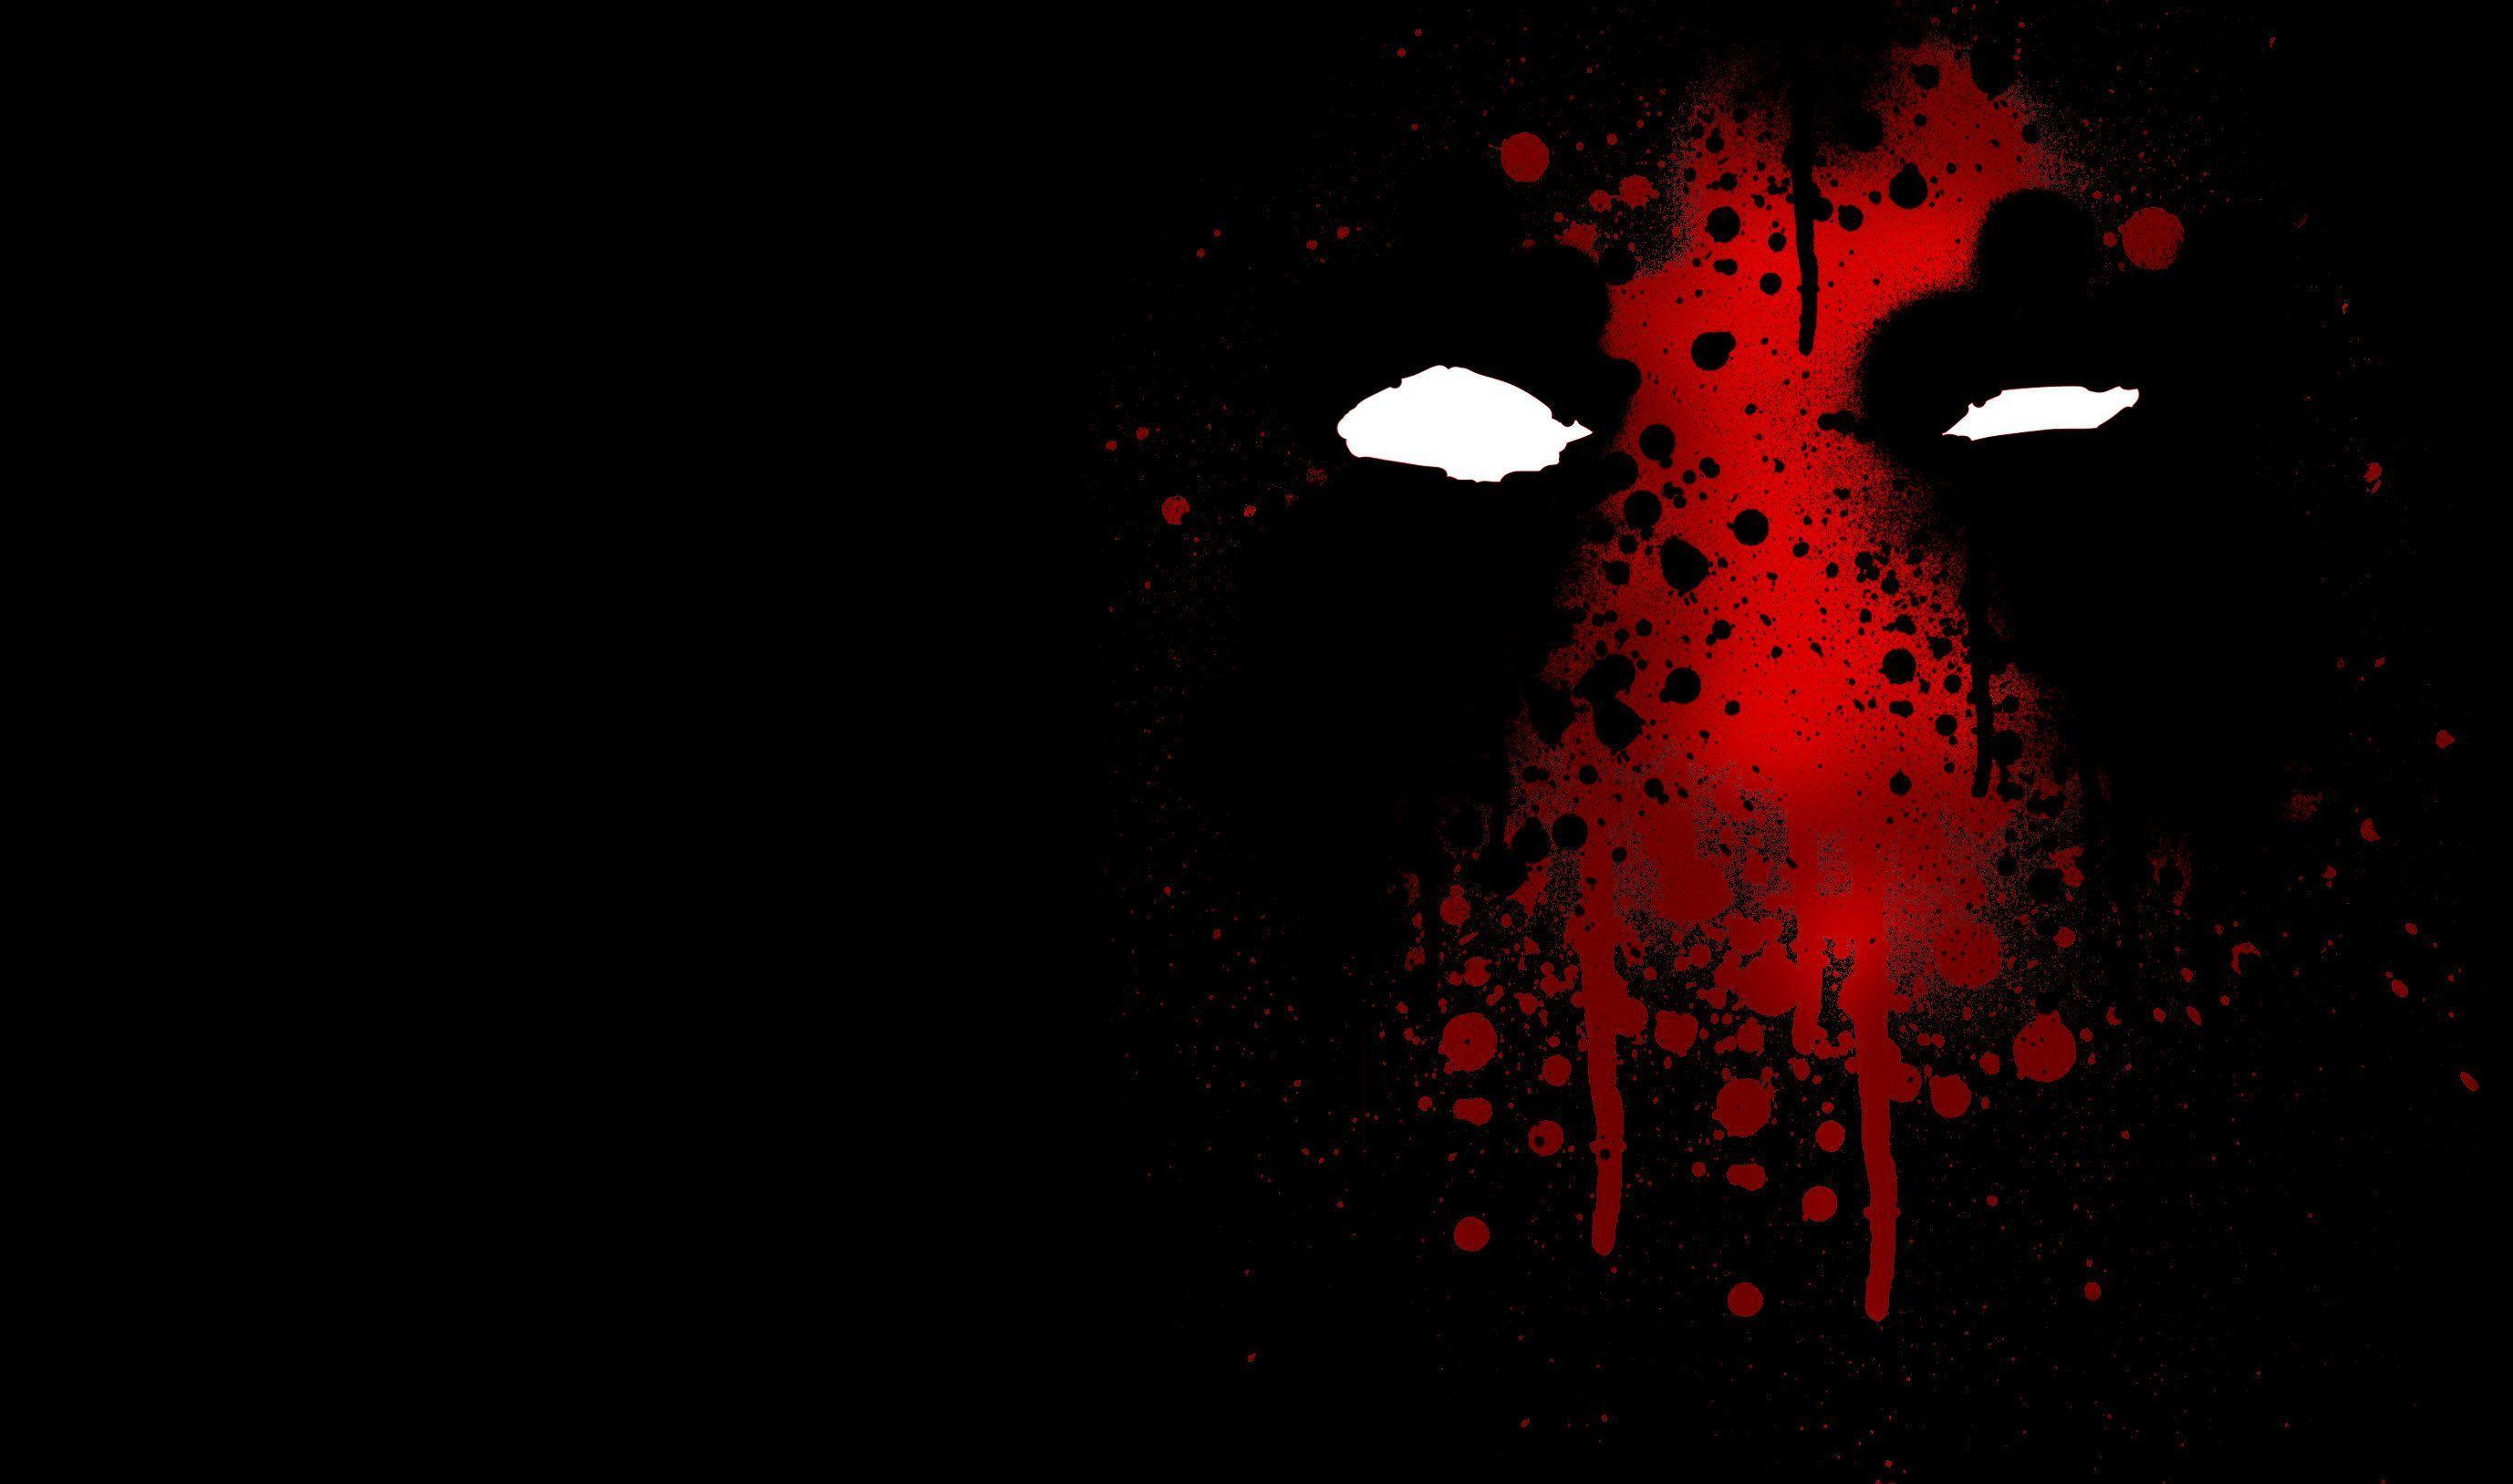 Awesome Deadpool wallpaper